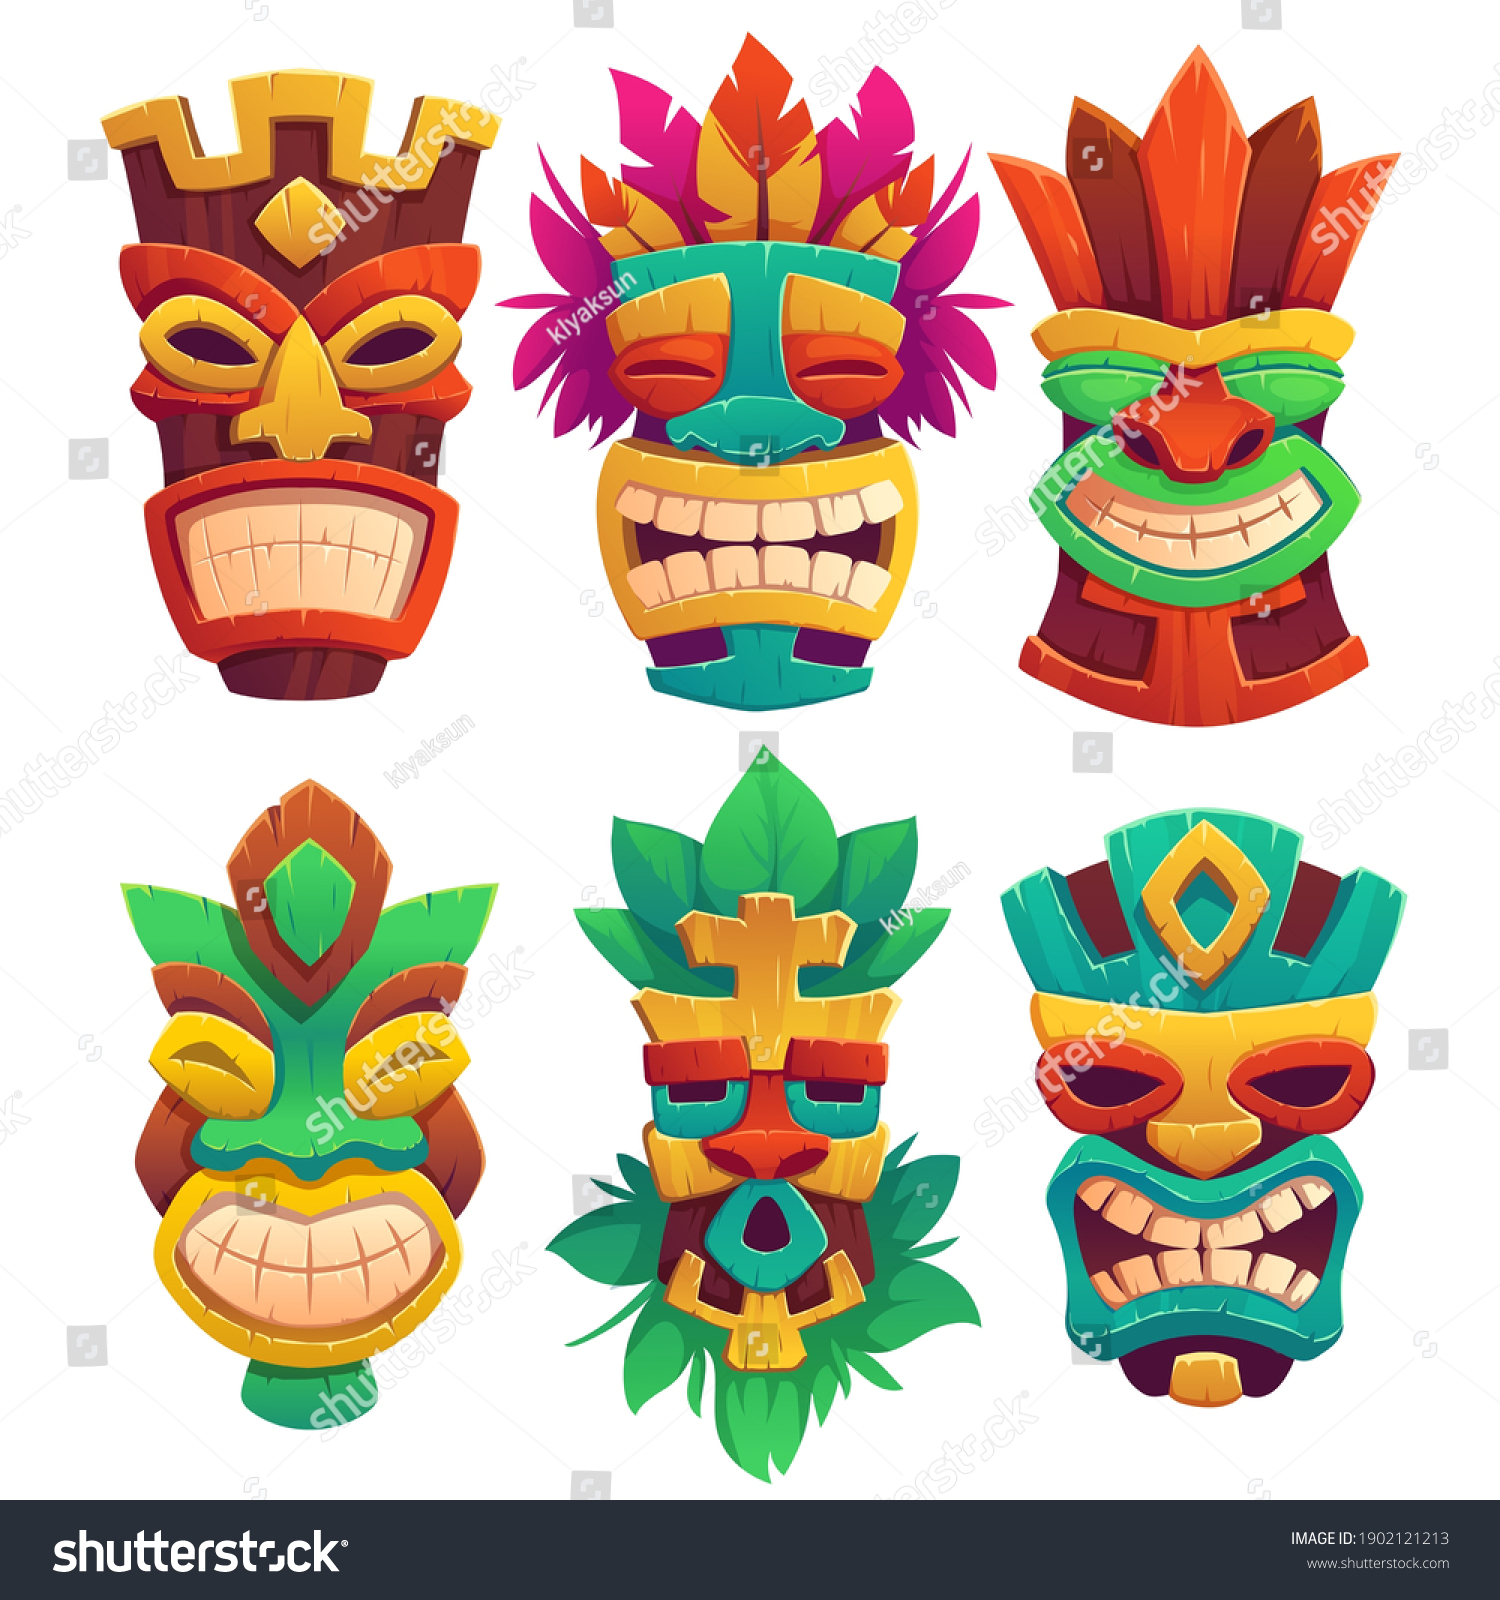 SVG of Tiki masks, tribal wooden totems, hawaiian or polynesian style attributes, scary faces with toothy mouth, decorated with leaves isolated on white background. Cartoon vector illustration, icons set svg